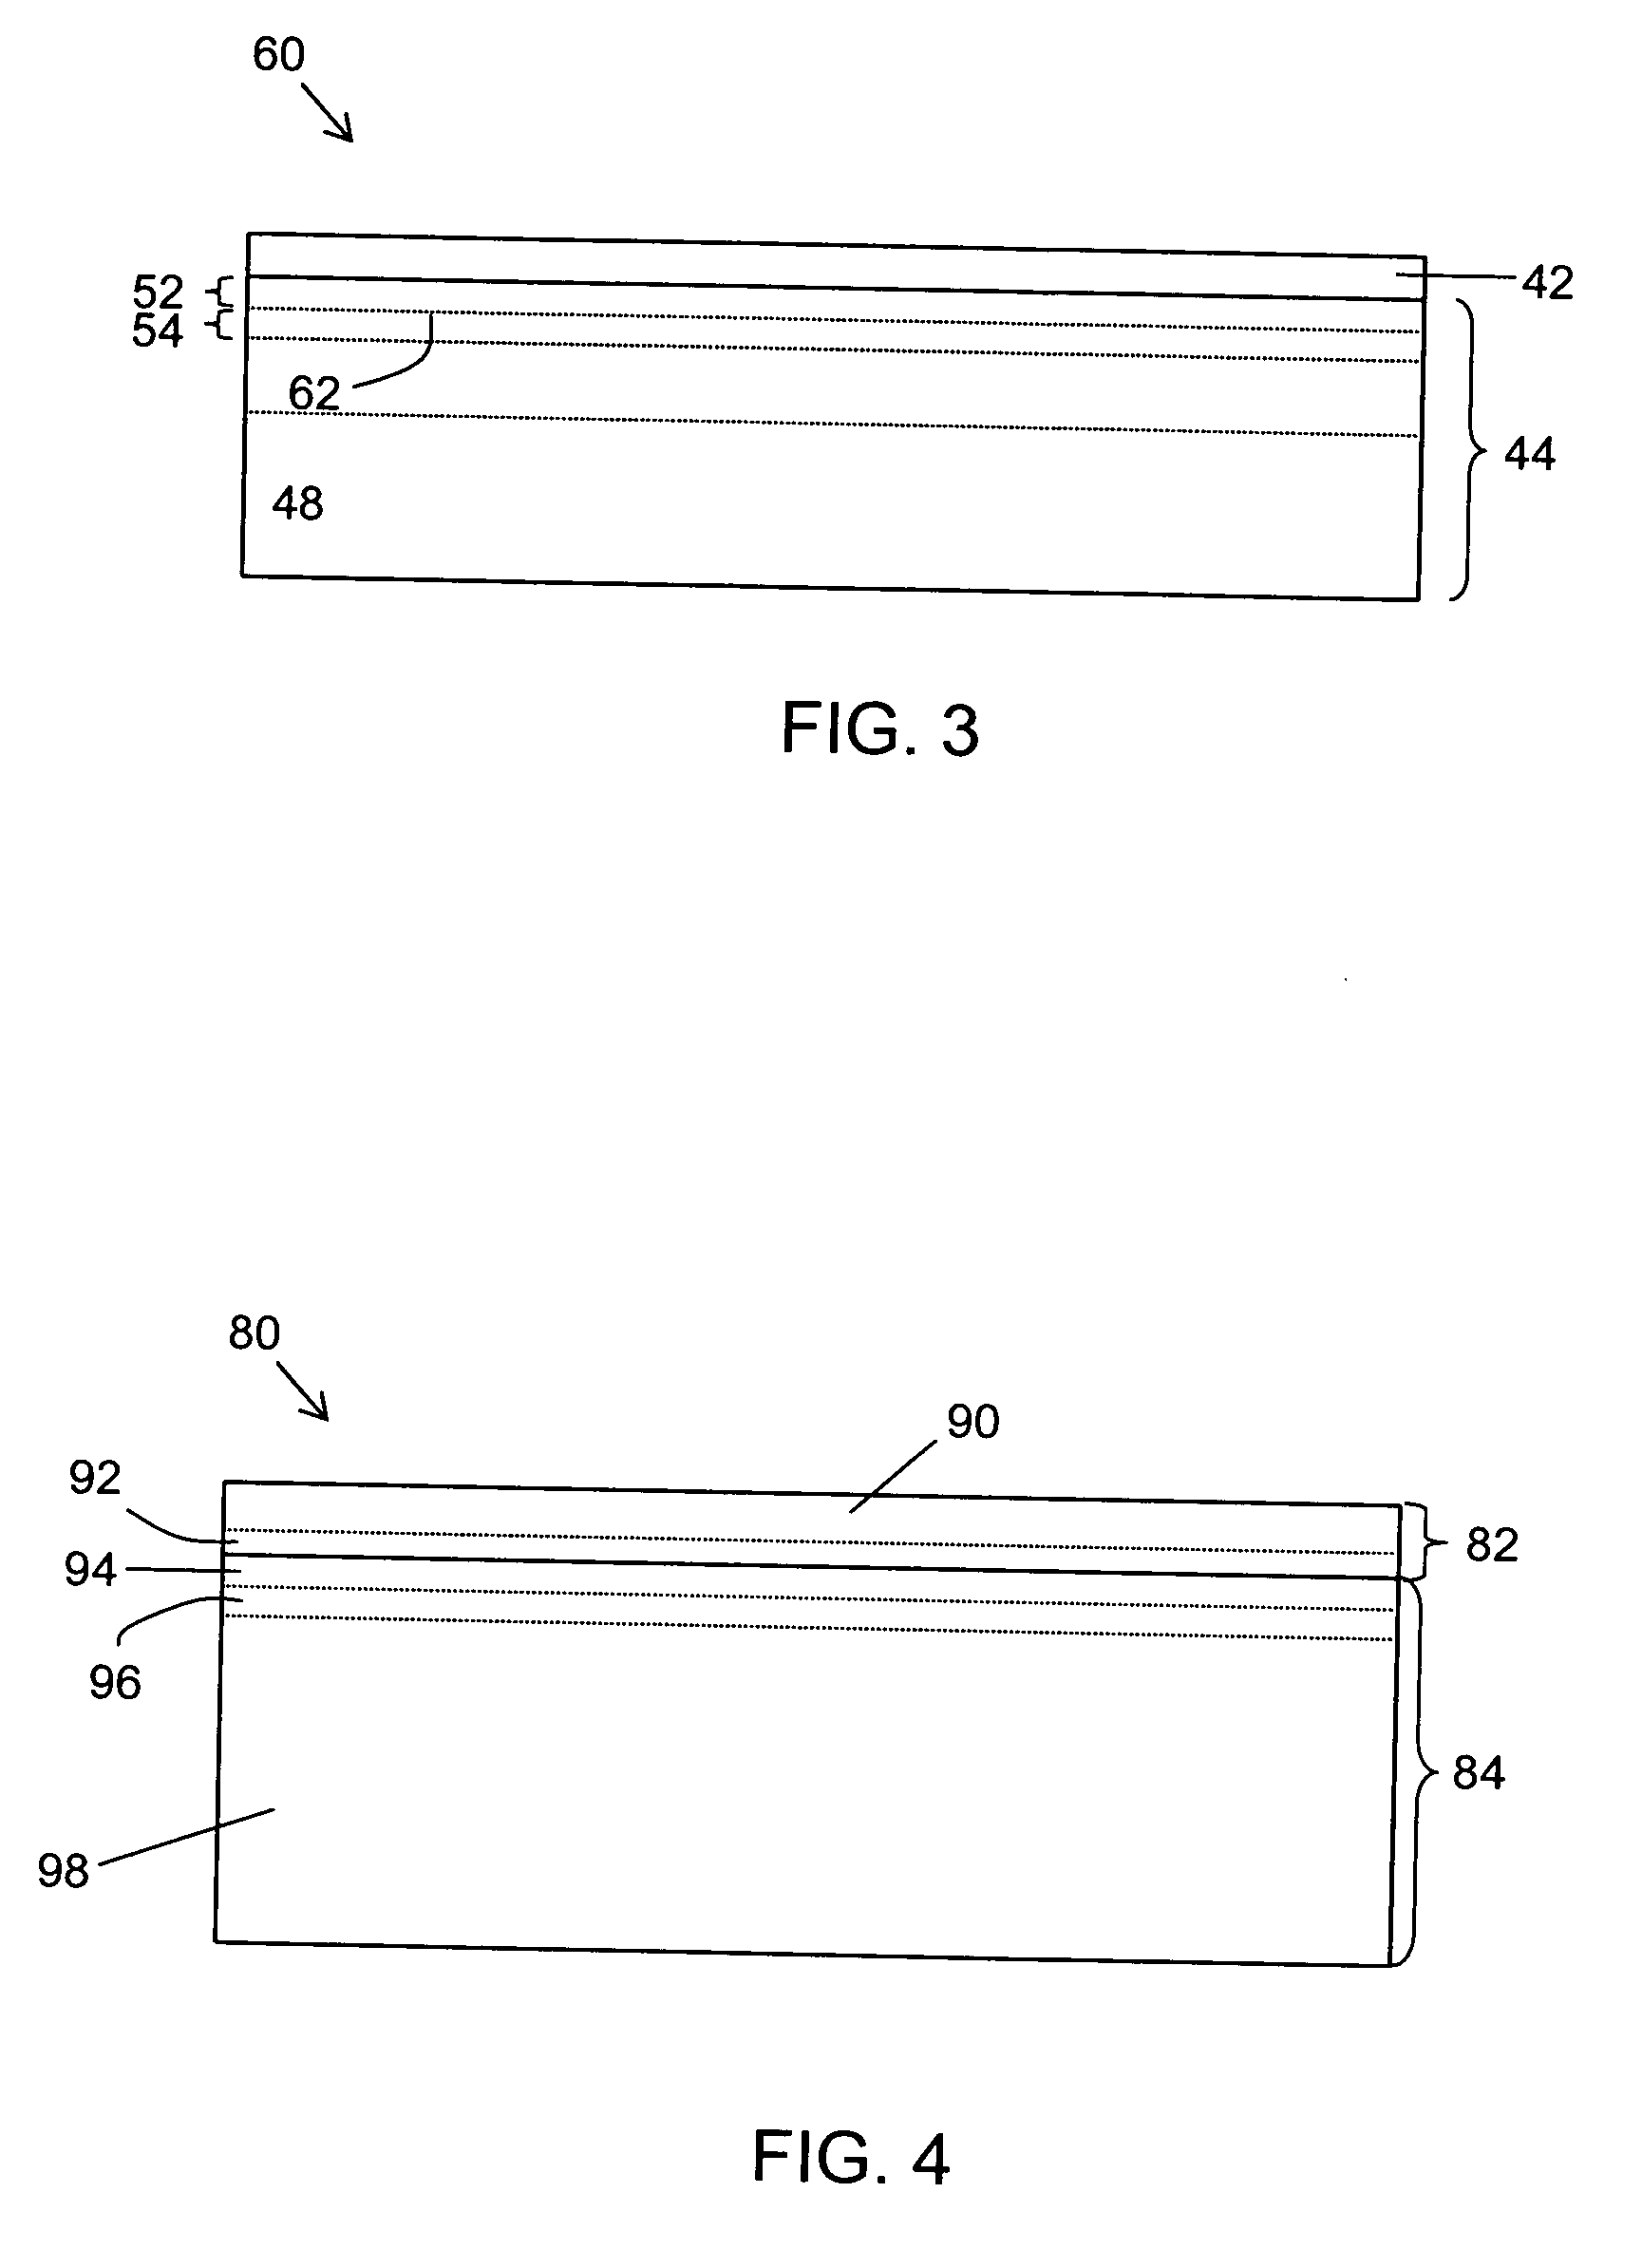 Strained semiconductor-on-insulator structures and methods for making strained semiconductor-on-insulator structures